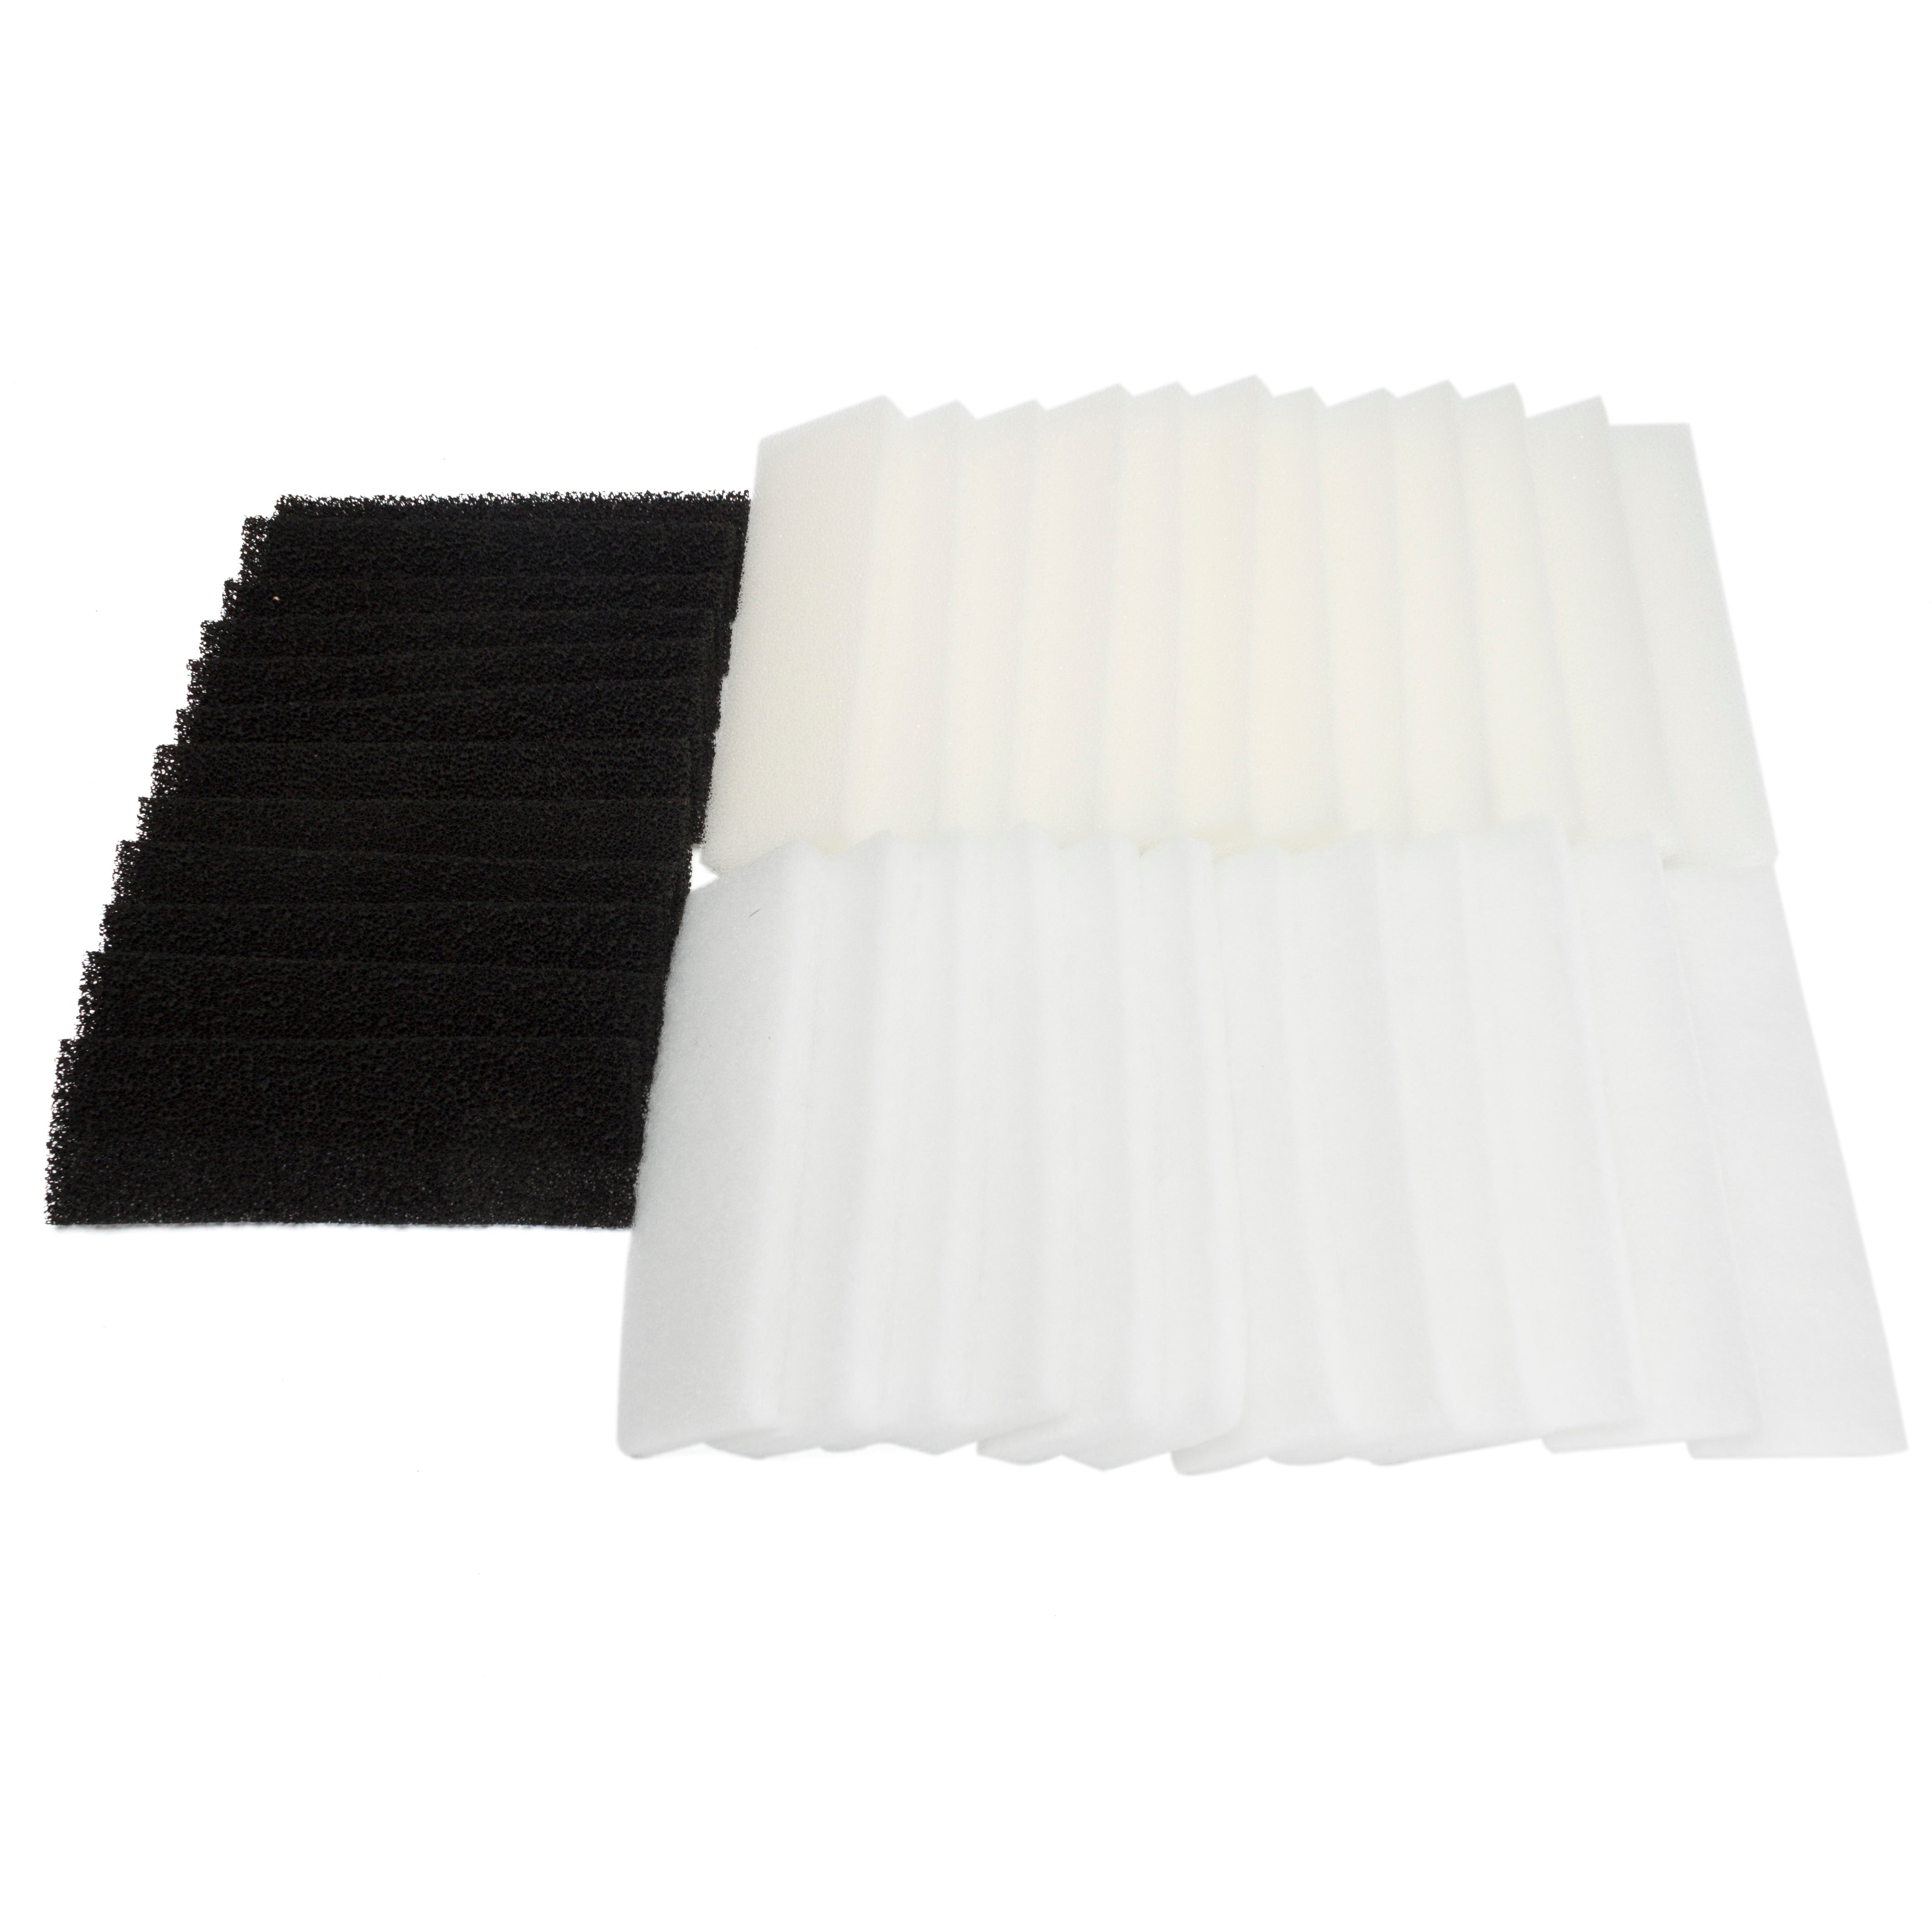 LTWHOME Value Pack of Foam Filters, Carbon Filters and Polyester Filters Set Fit for Fluval U3 Filter(Pack of 36)